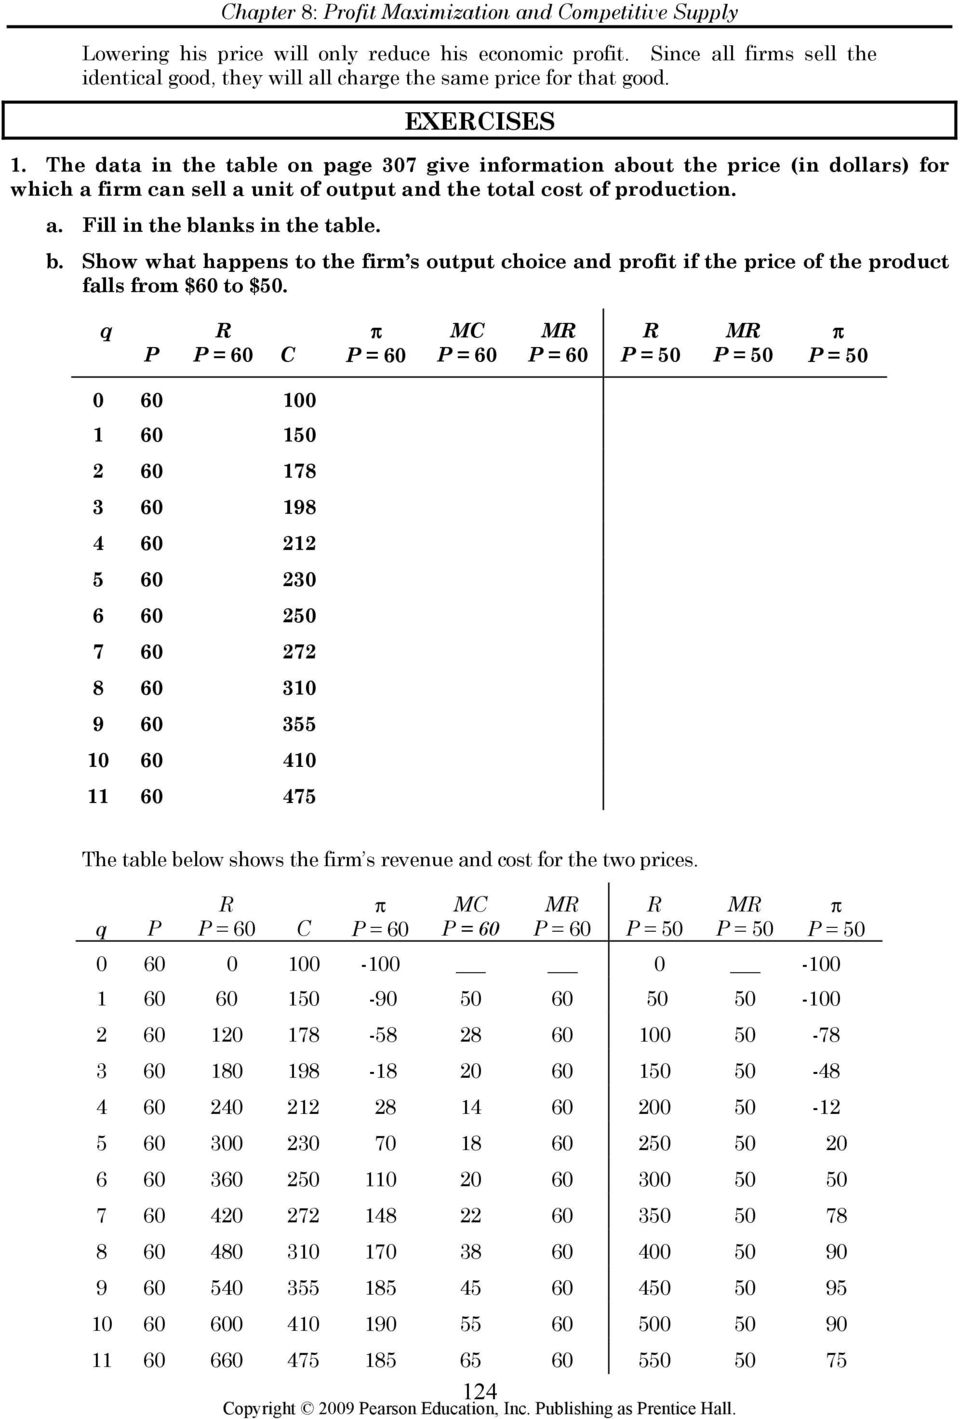 anks in the table. b. Show what happens to the firm s output choice and profit if the price of the product falls from $60 to $50.